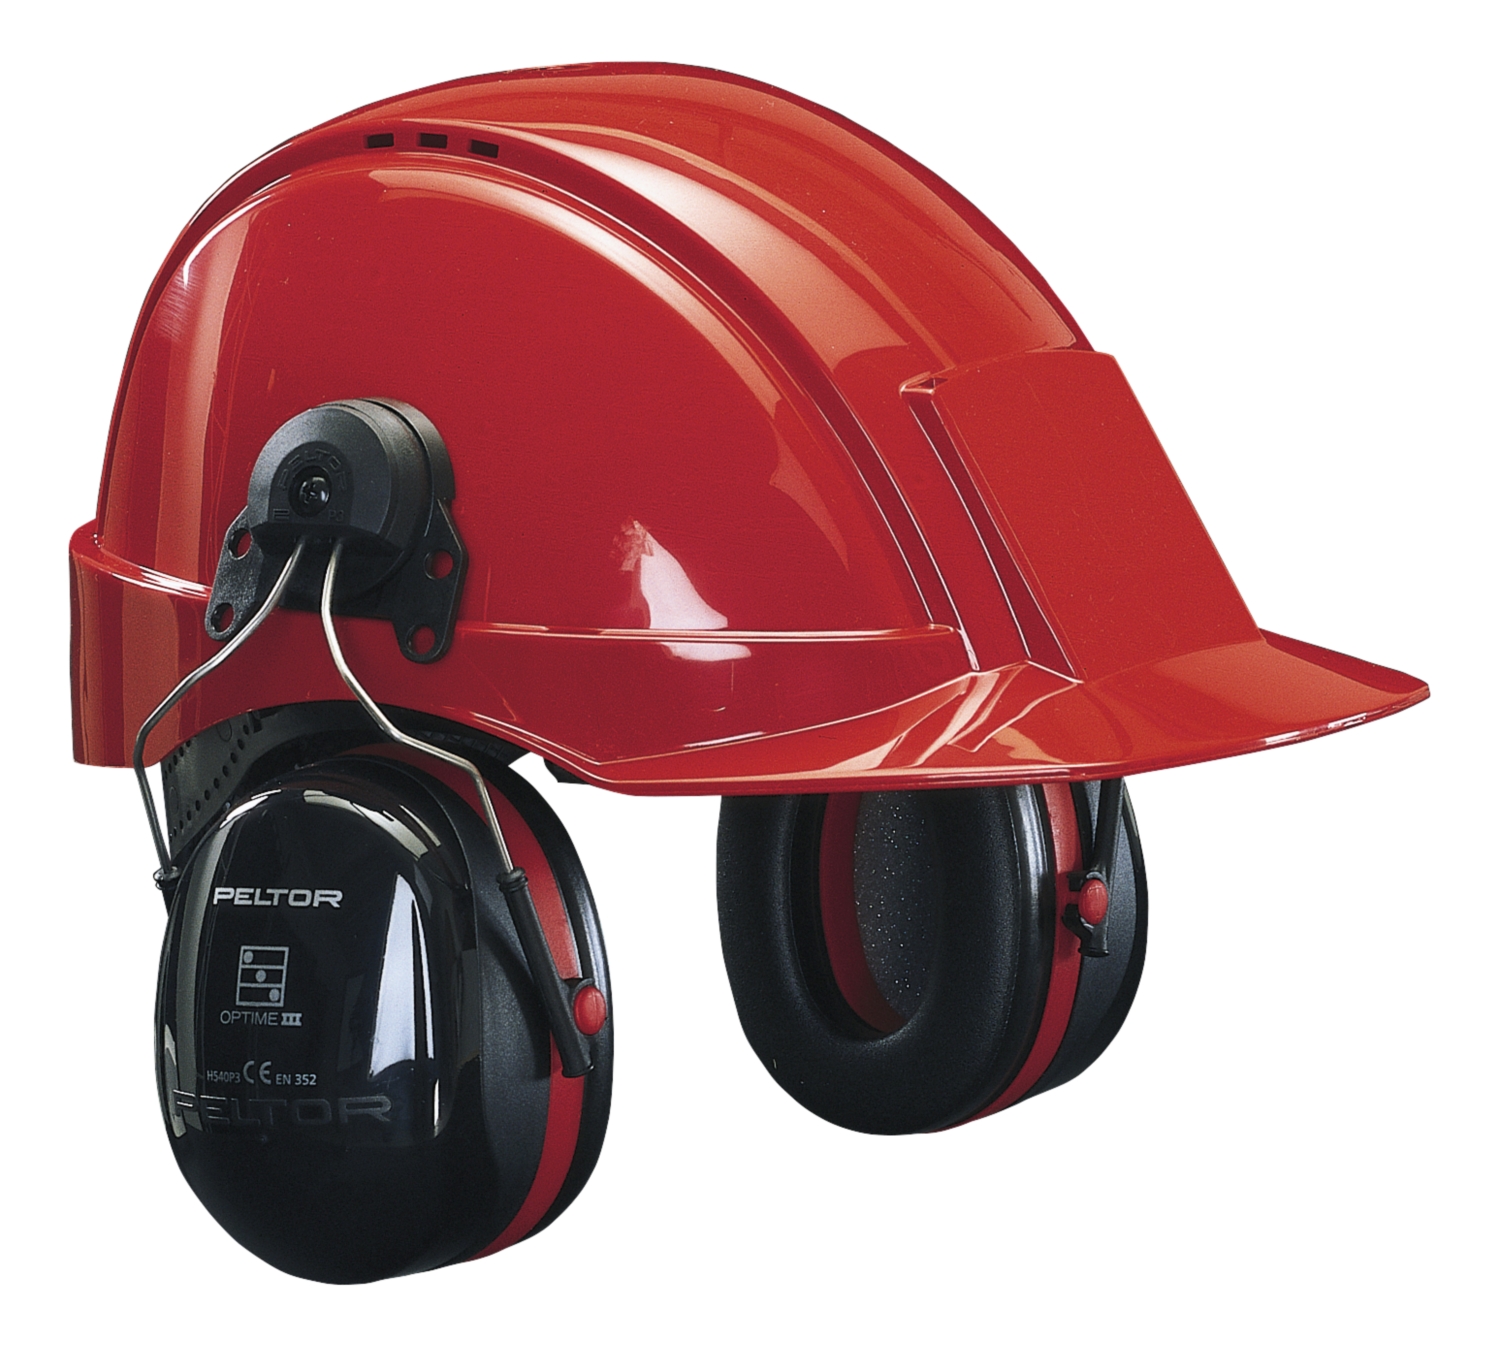 CASQUE PROTECTION AUDITIVE PELTOR